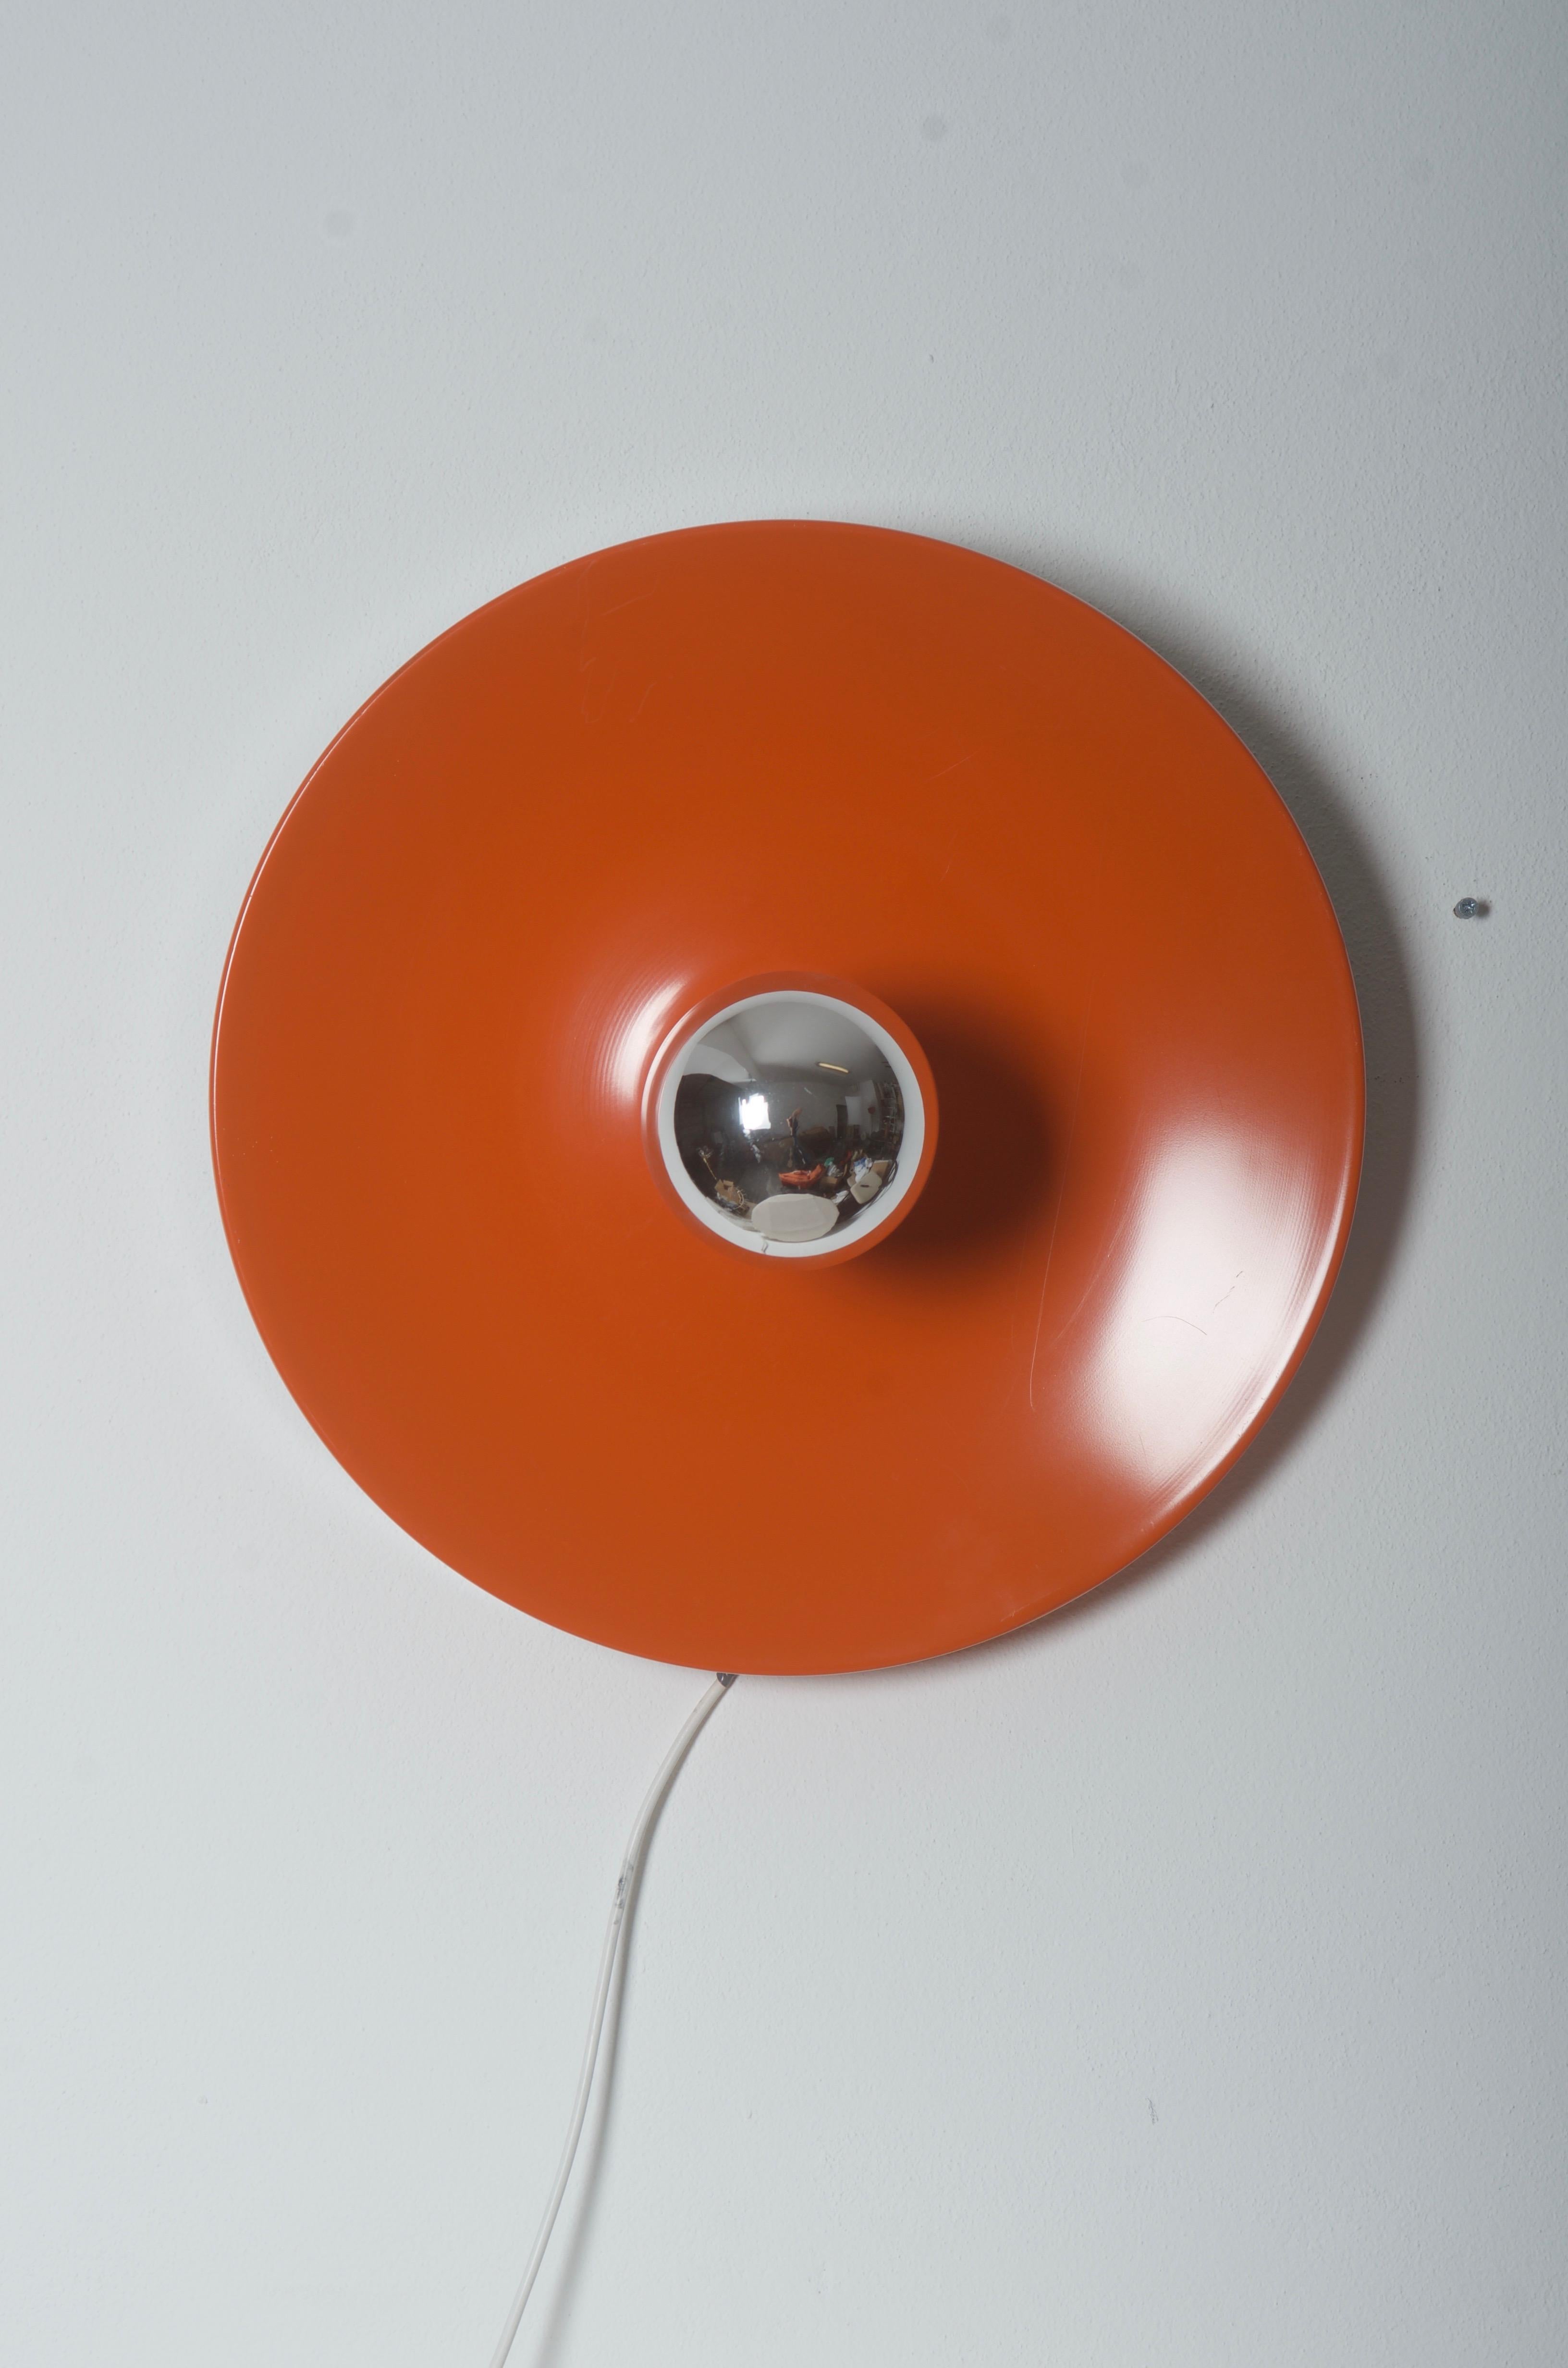 Ceiling or wall light, German design in the 1970s. Construction made of orange lacquered steel.